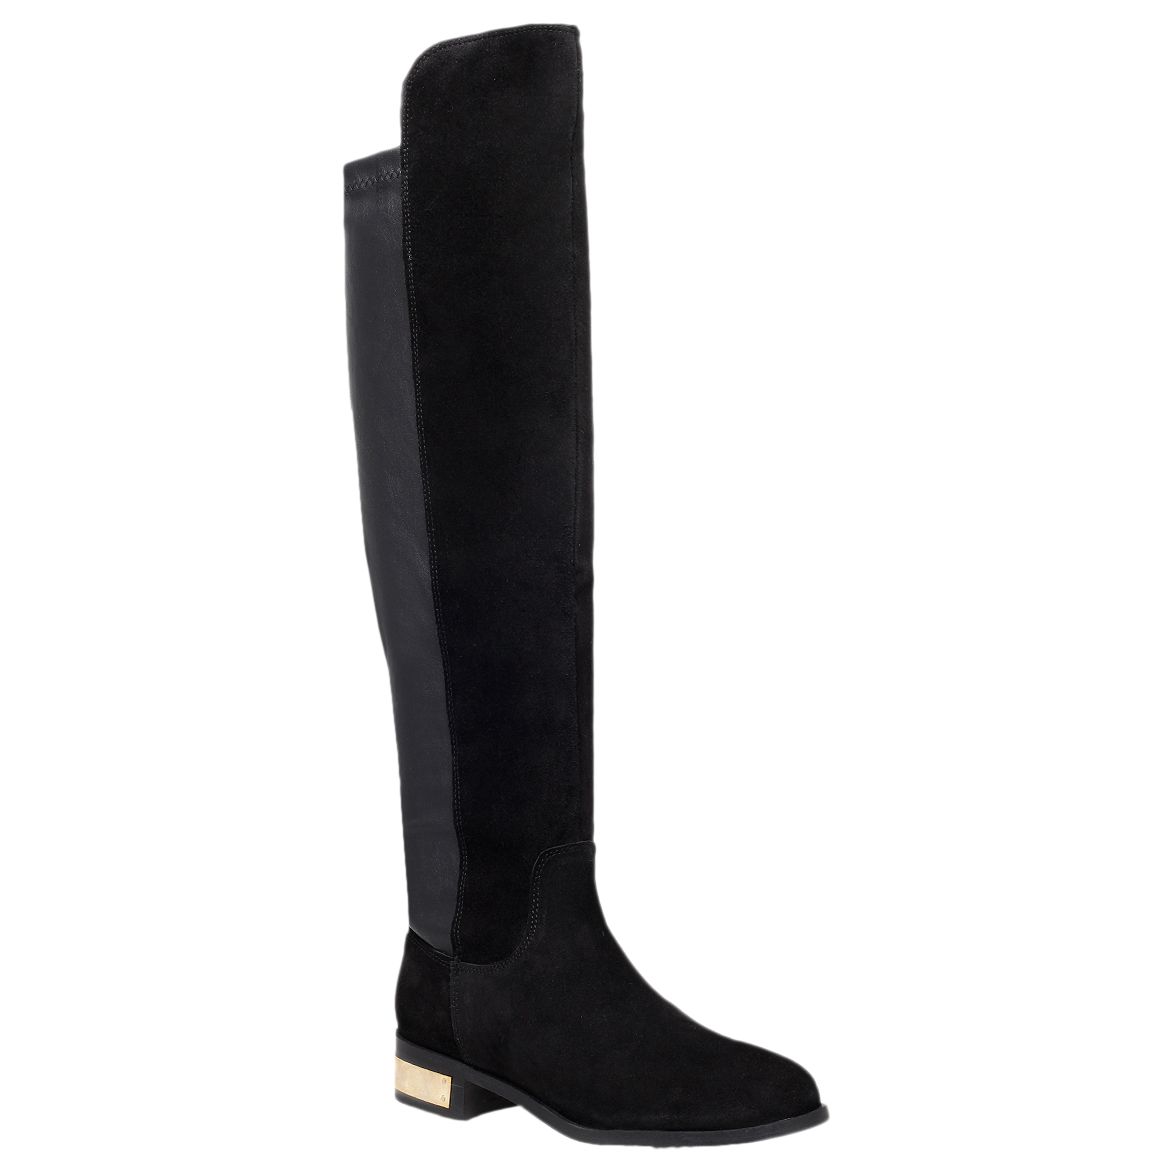 Carvela Pacific Knee High Boots, Black Suede